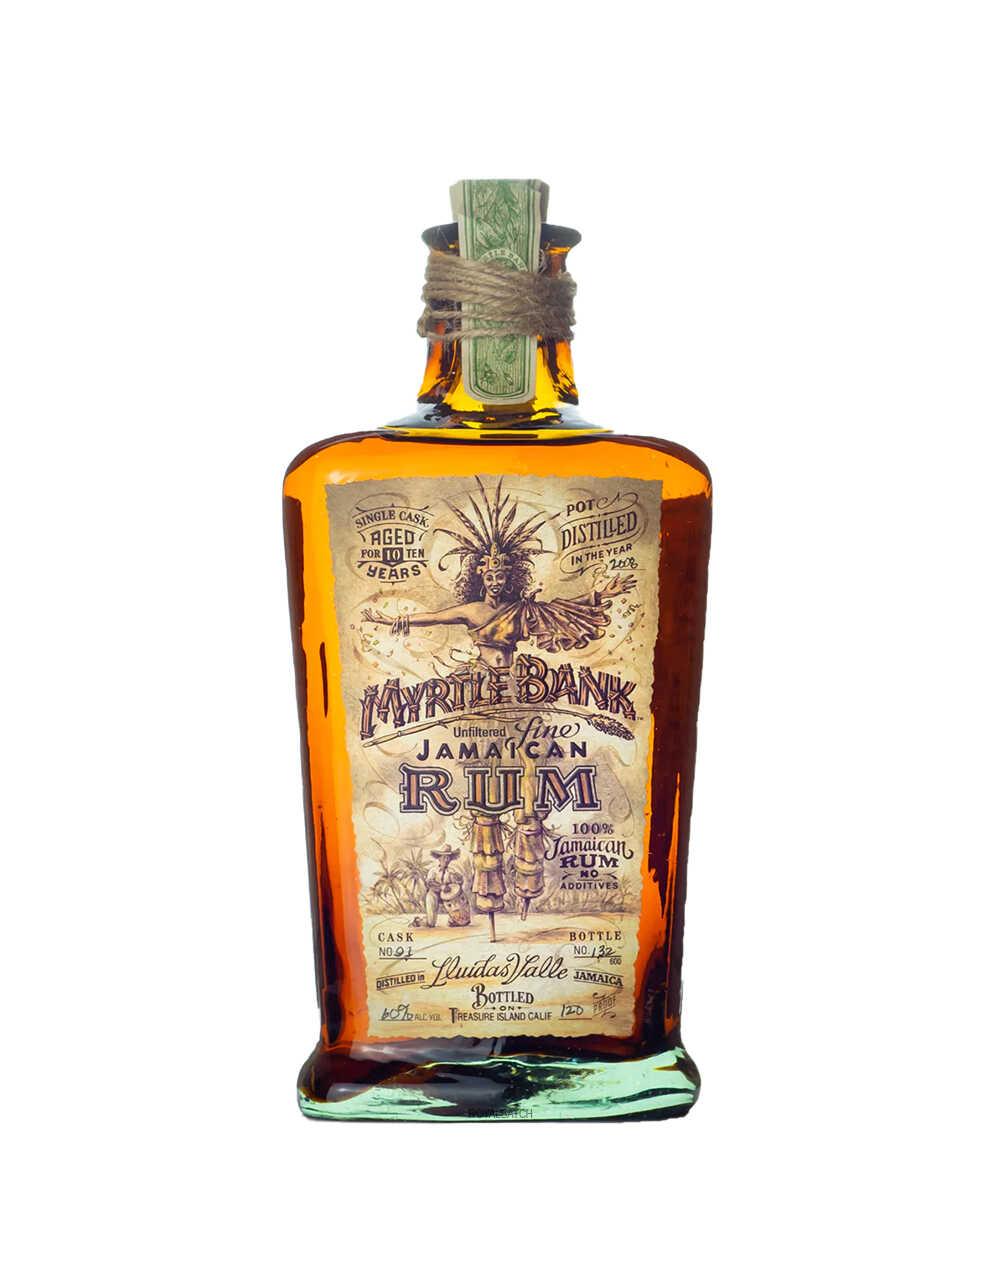 Myrtle Bank 10 Year Old 120 Proof Jamaican Rum